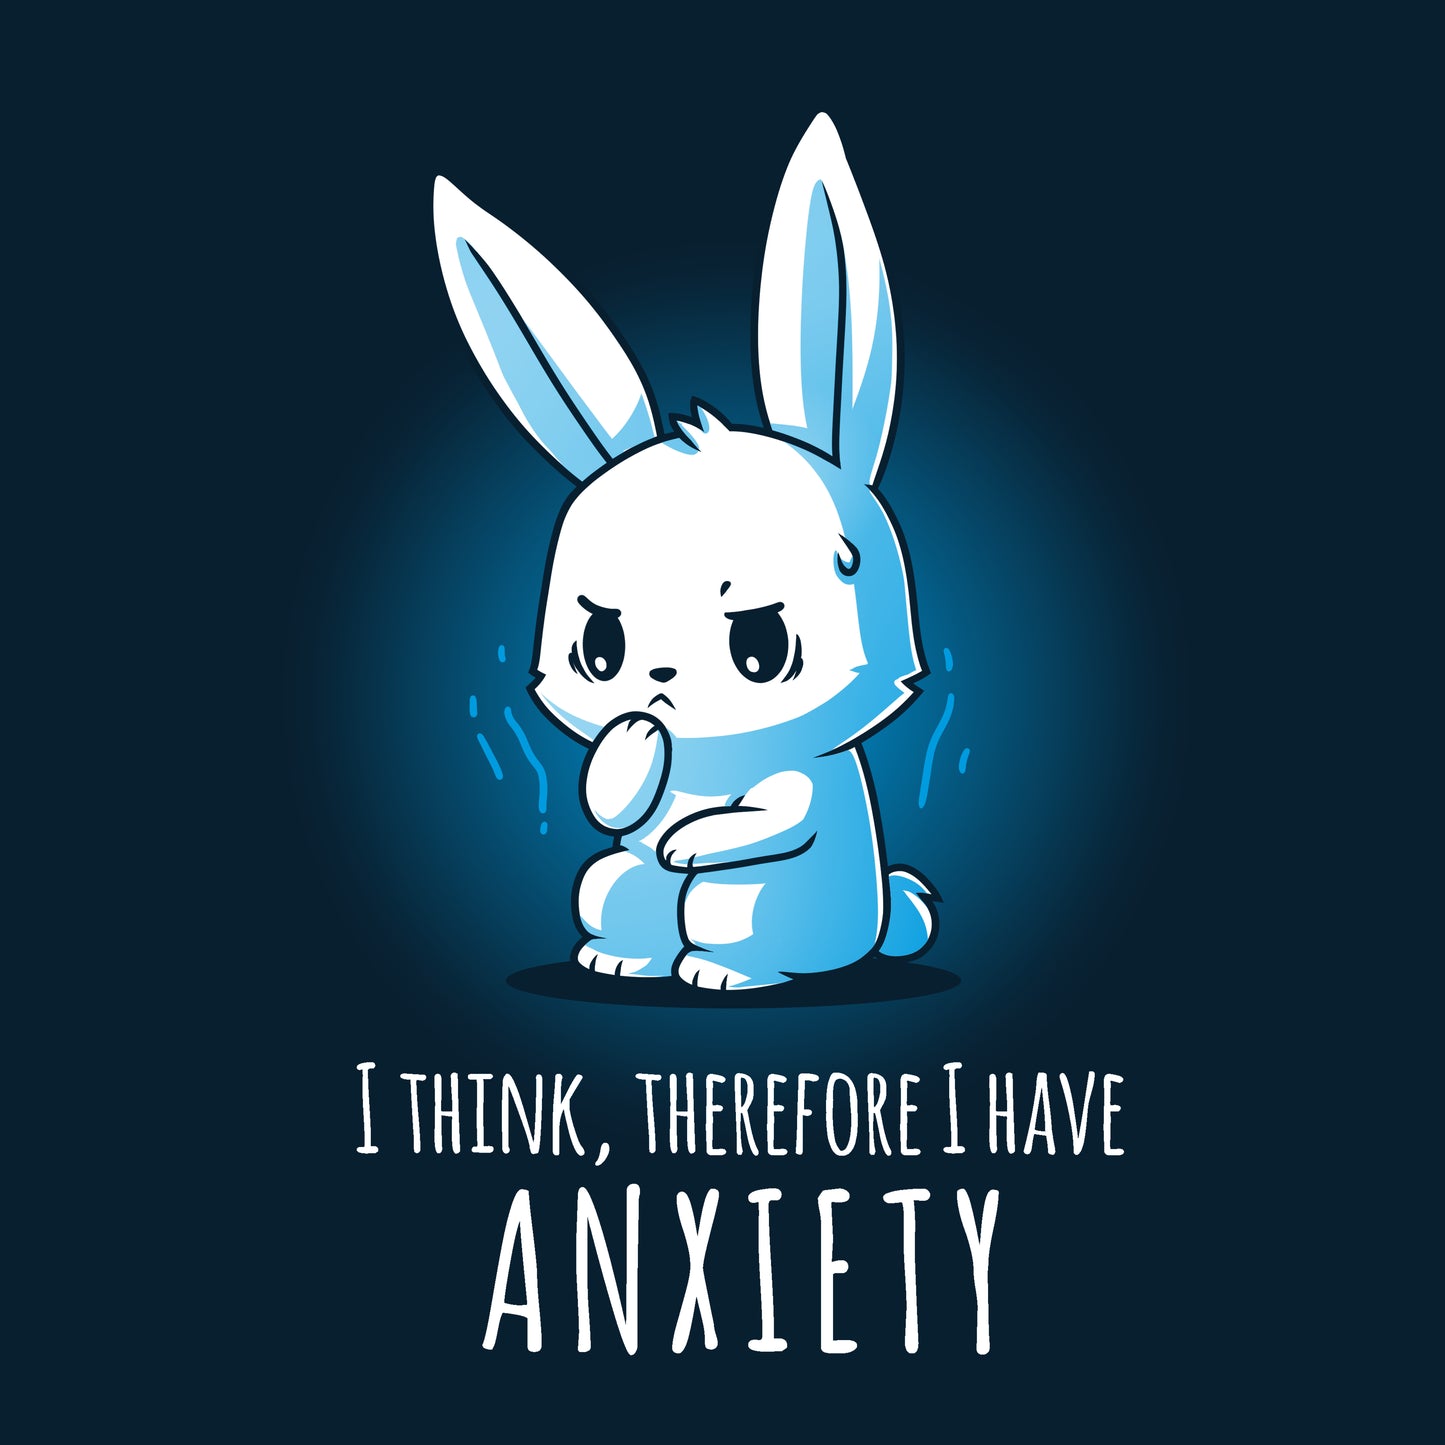 I have TeeTurtle's product "I Think, Therefore I Have Anxiety".